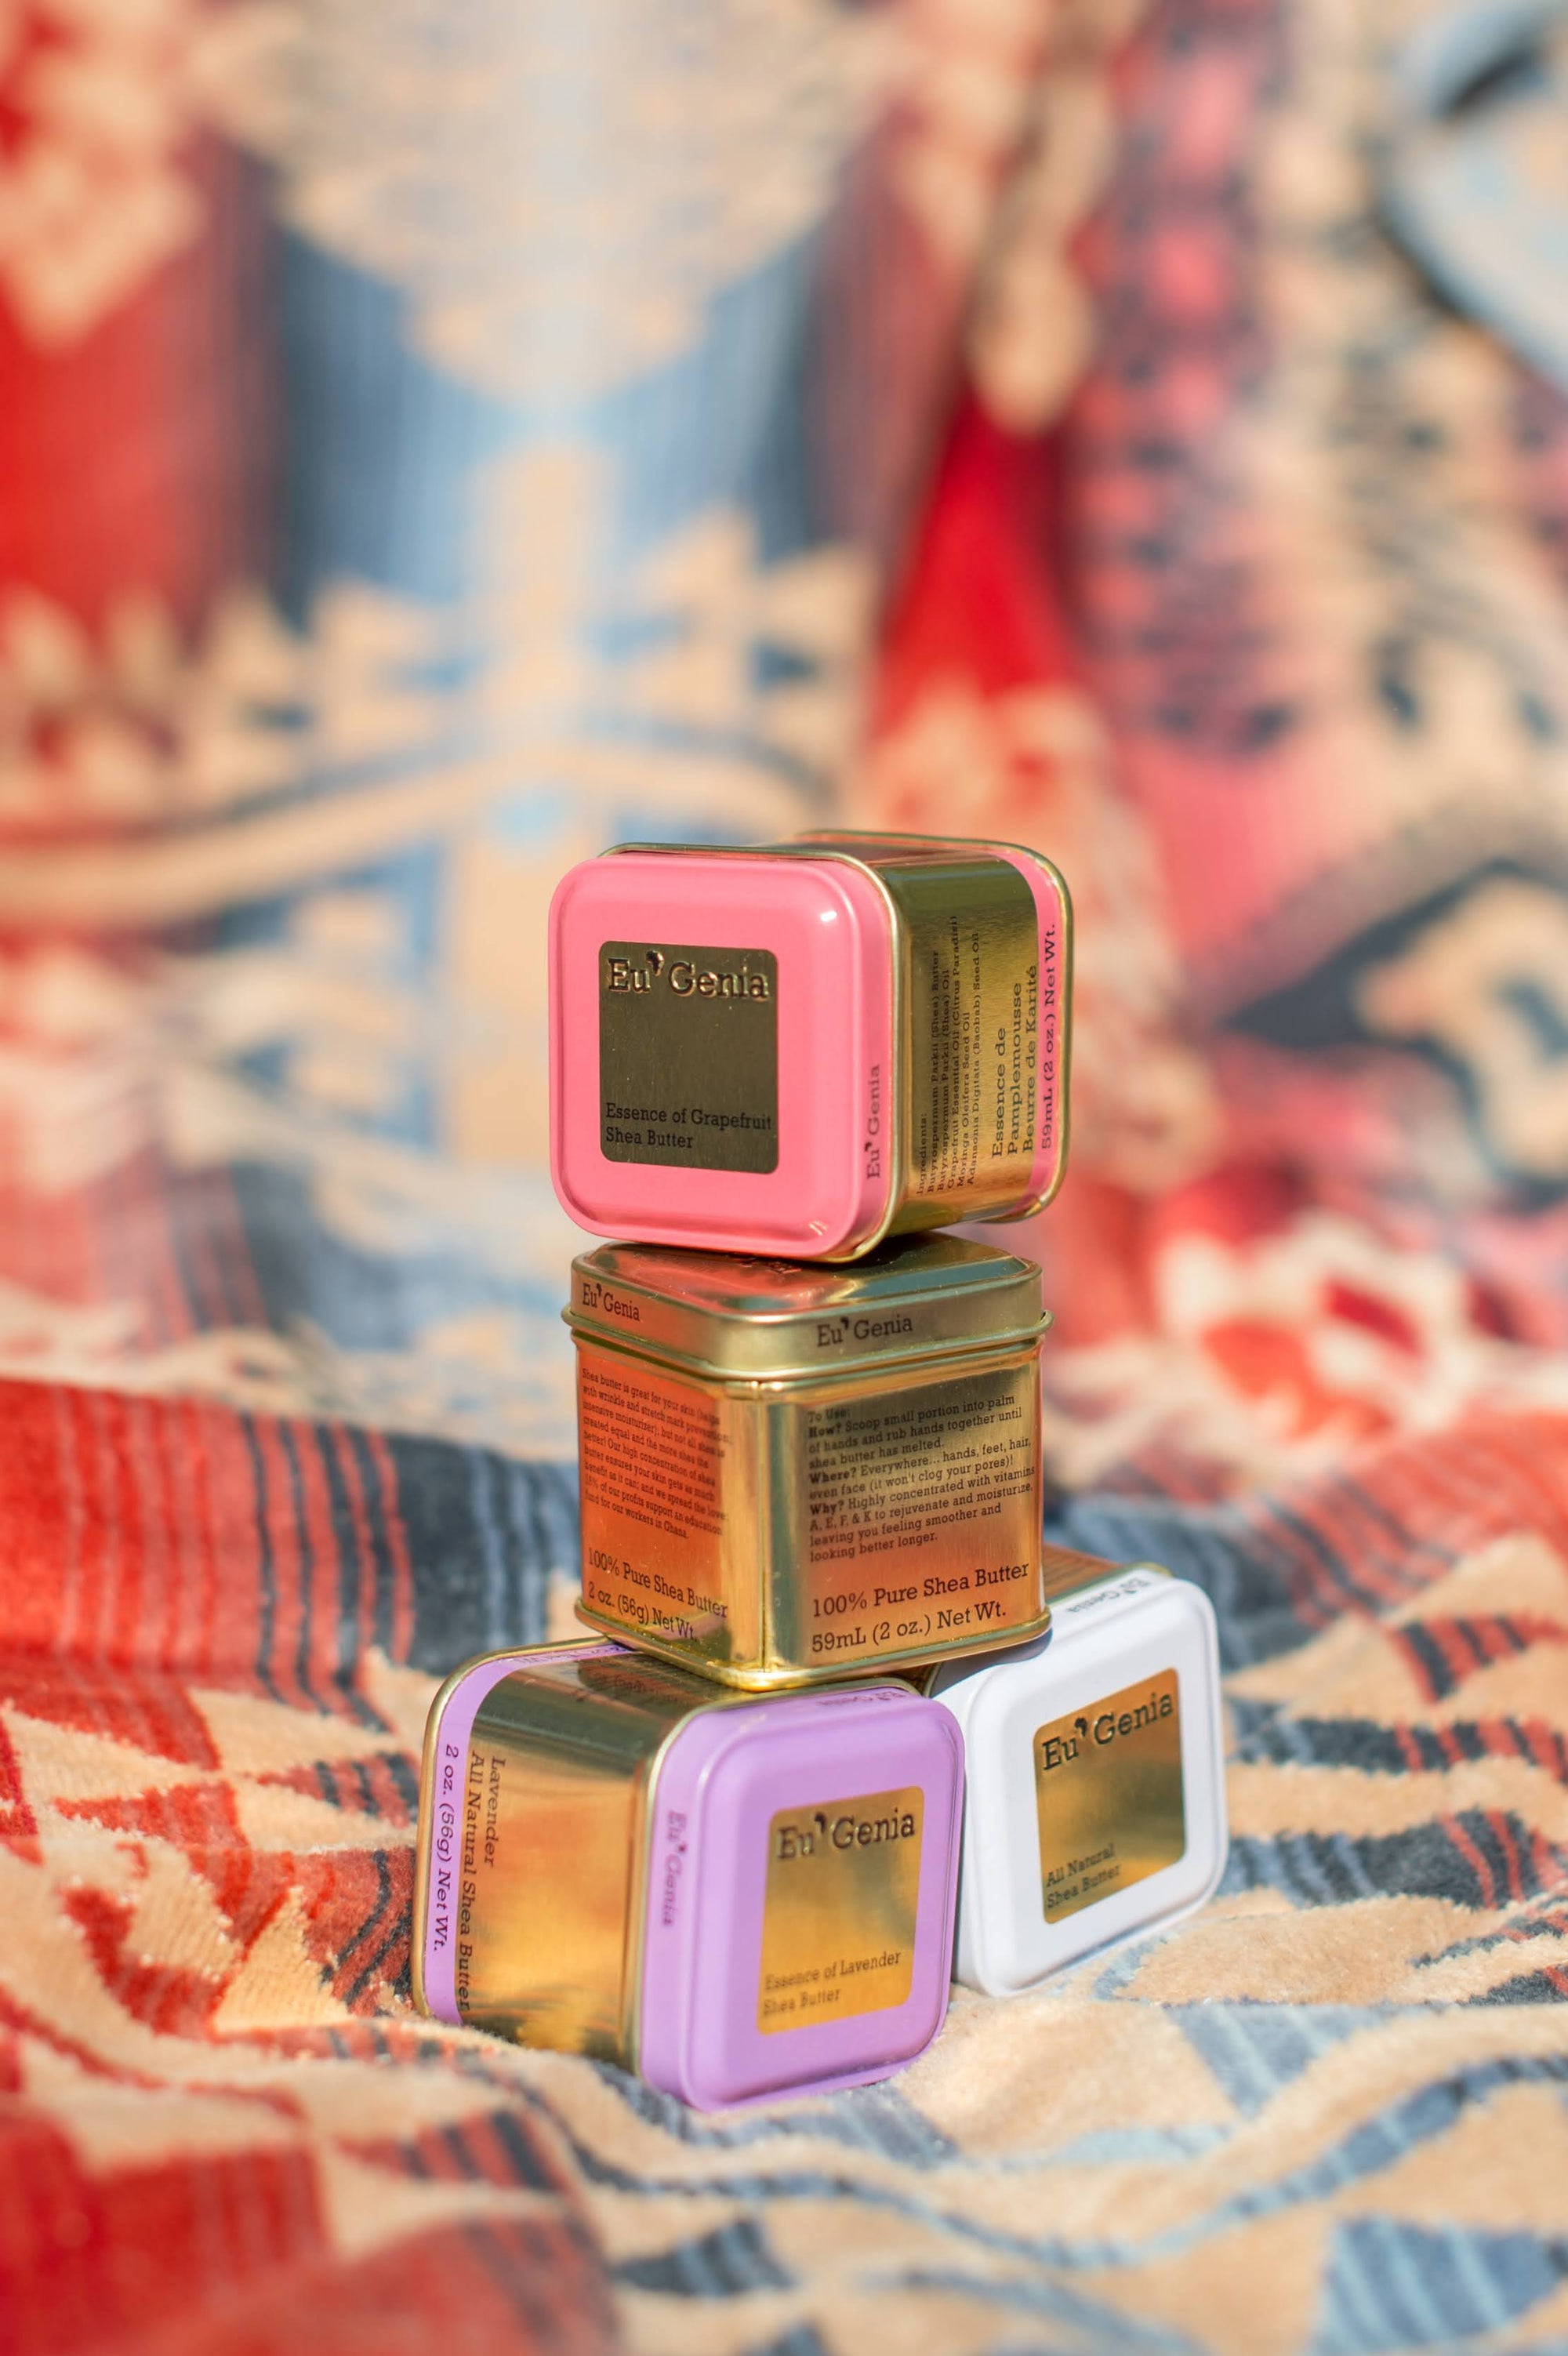 Four tins of Eu'Genia from the moisturizing gift bundle are stacked on a colorful background